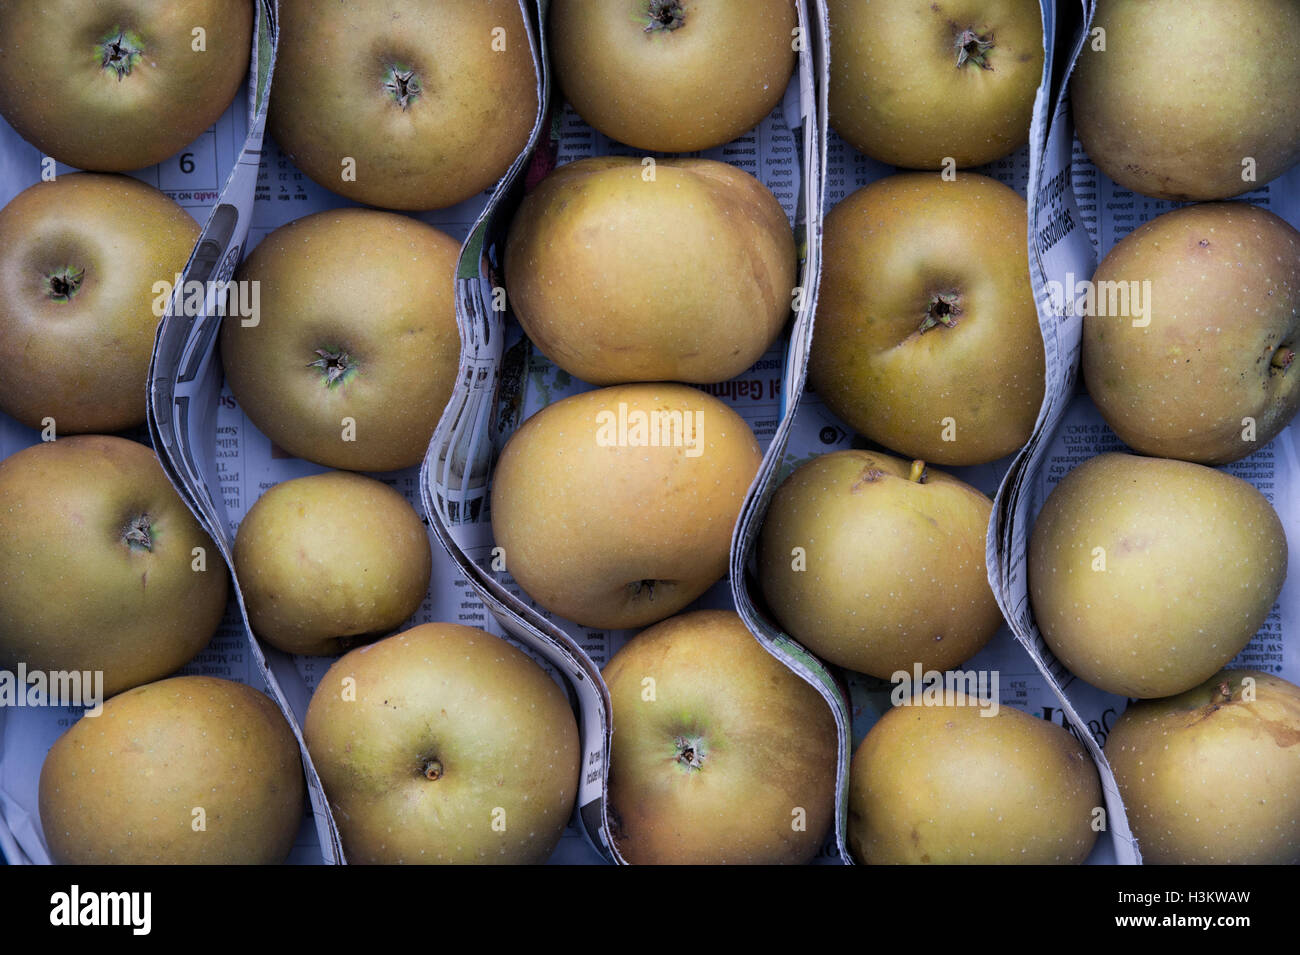 Malus Domestica. Storing eating apples between newspaper in a tray over winter pattern Stock Photo